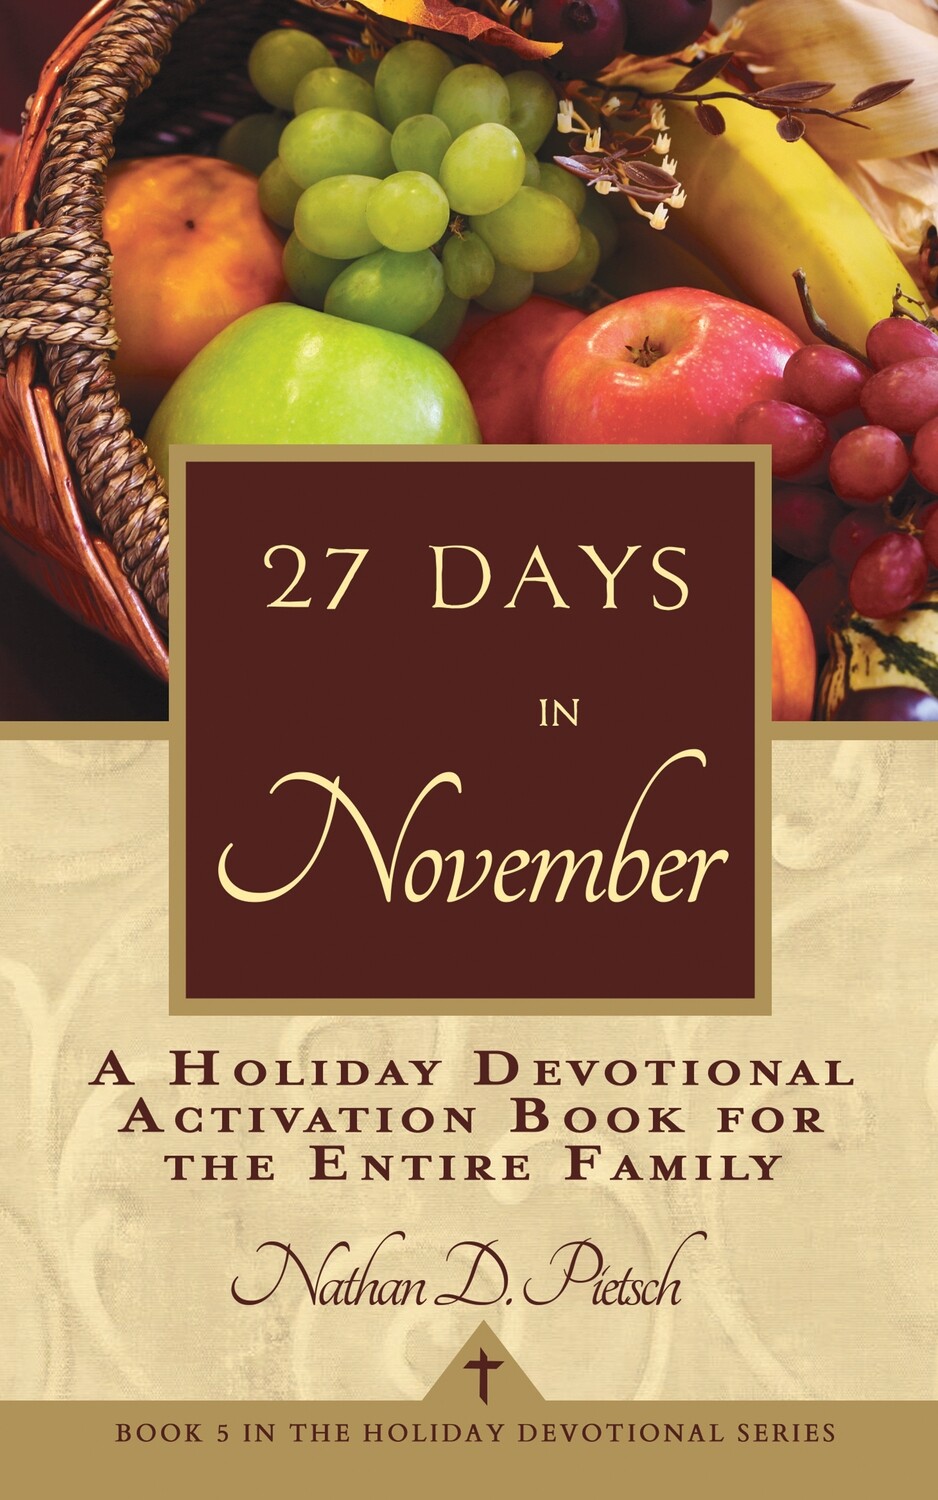 27 Days in November (Holiday Devotional Series, Book 5)